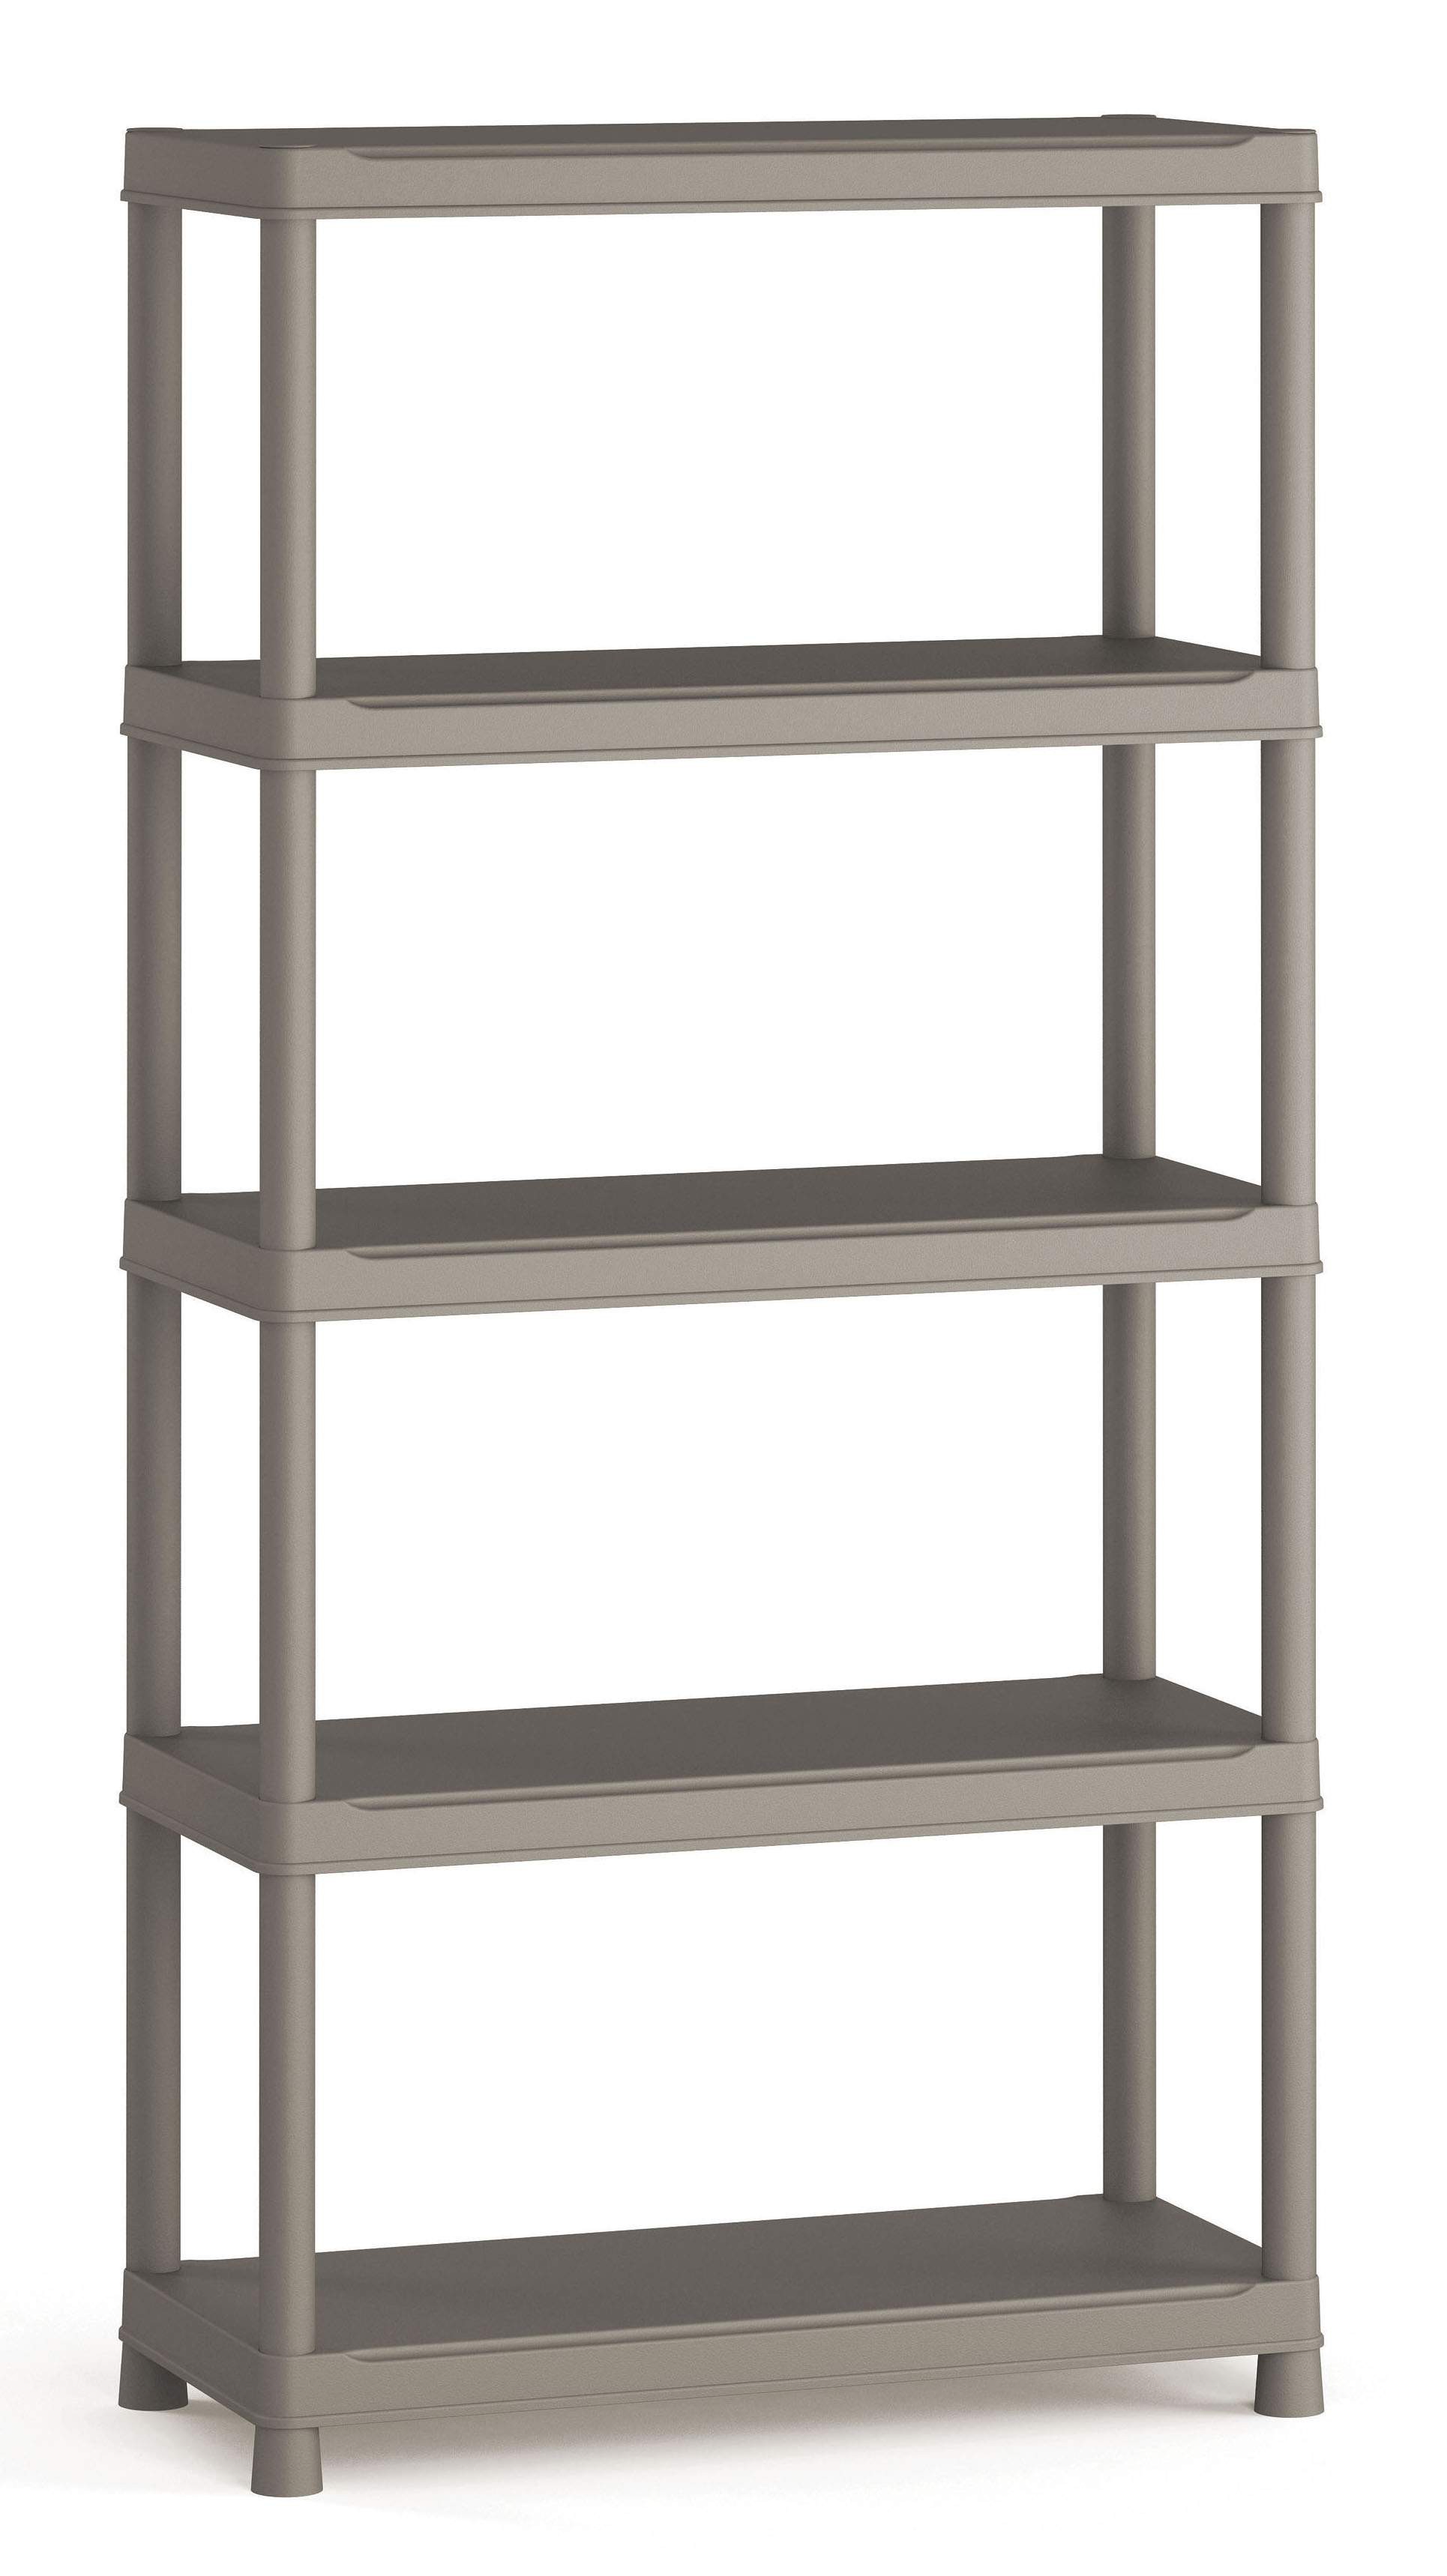 ETAGERE RESINE GRISE SPACEO 90 5 TABLETTES